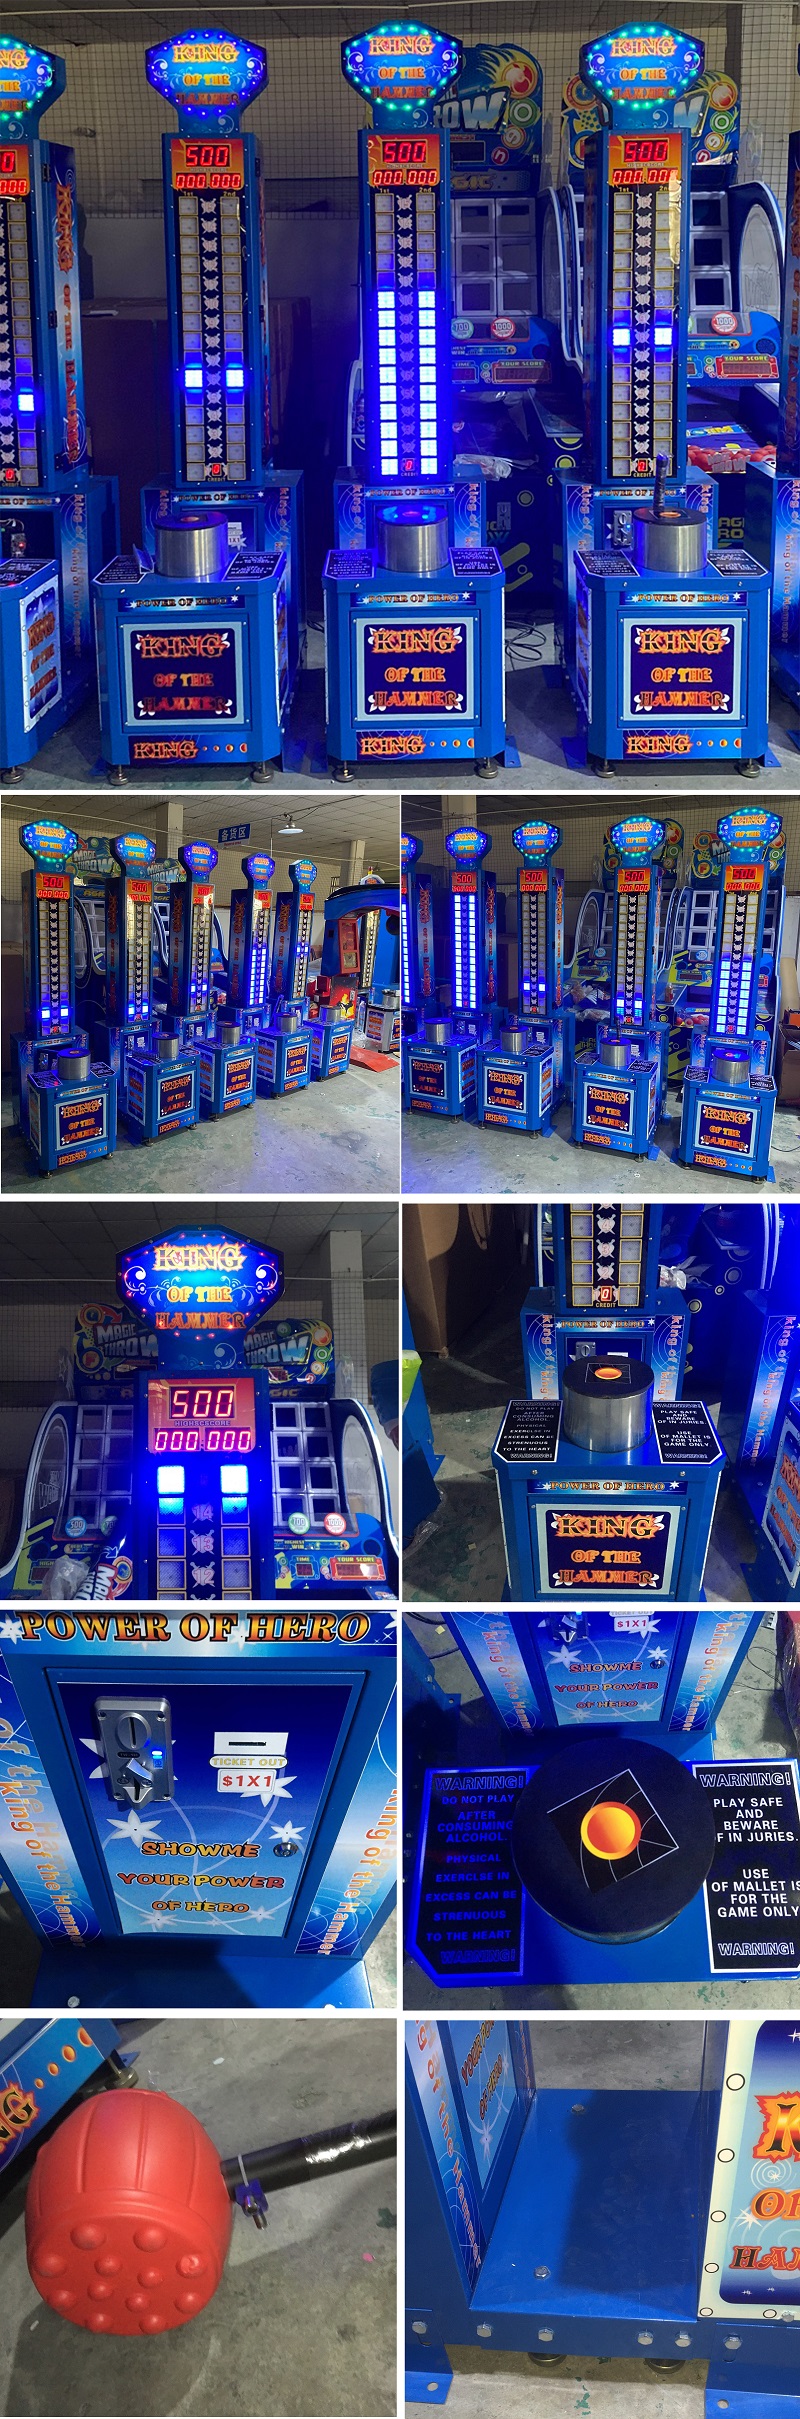 King-of-Hammer-Hercules-China-Direct-Coin-Operated-Redemption-Game-Machine-Tomy-Arcade